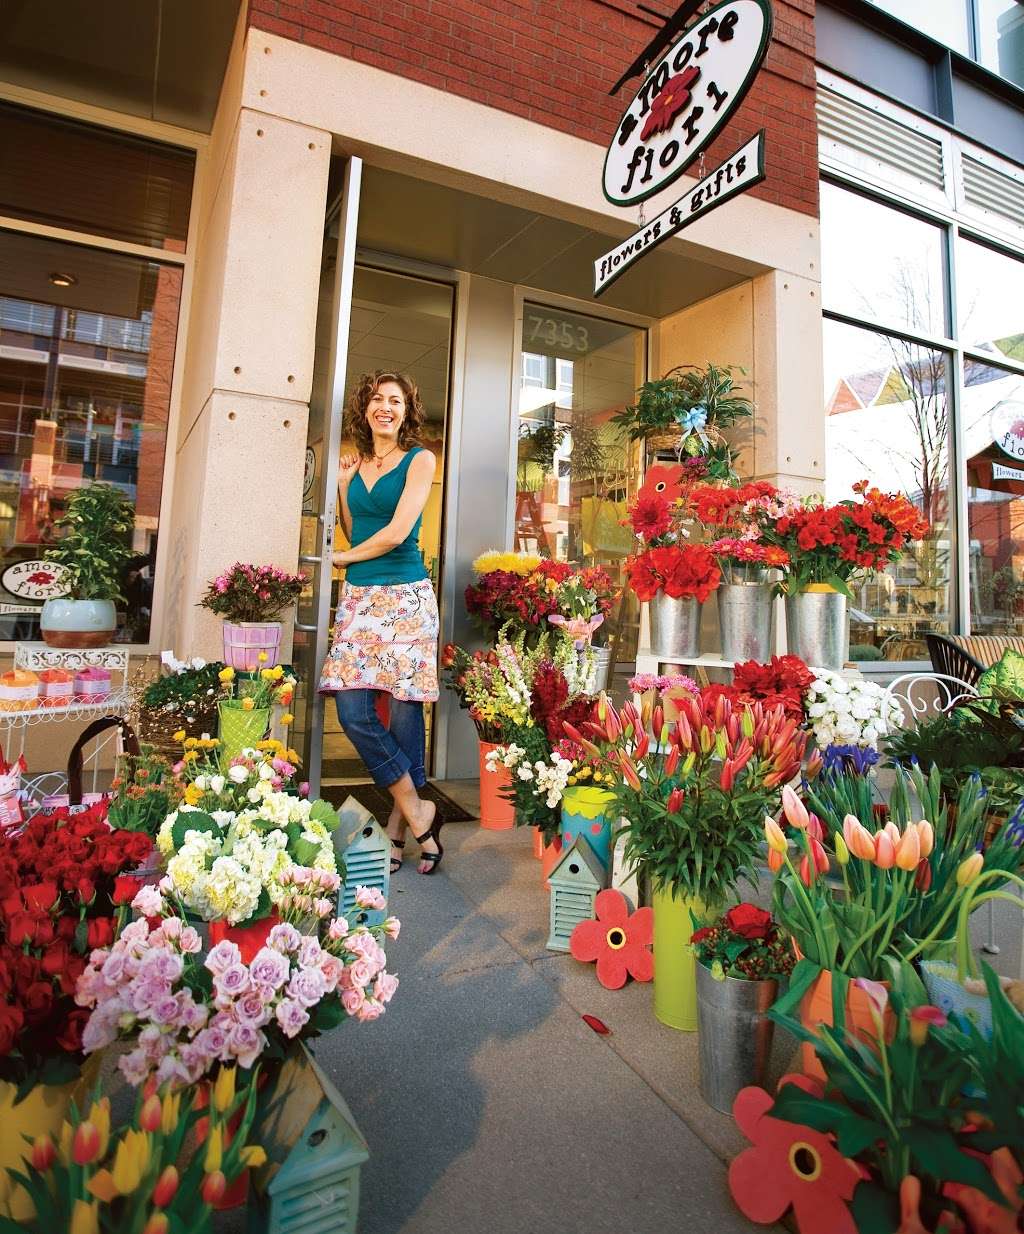 Amore Fiori Flowers & Gifts | 7353 29th Ave, Denver, CO 80238 | Phone: (303) 333-3848